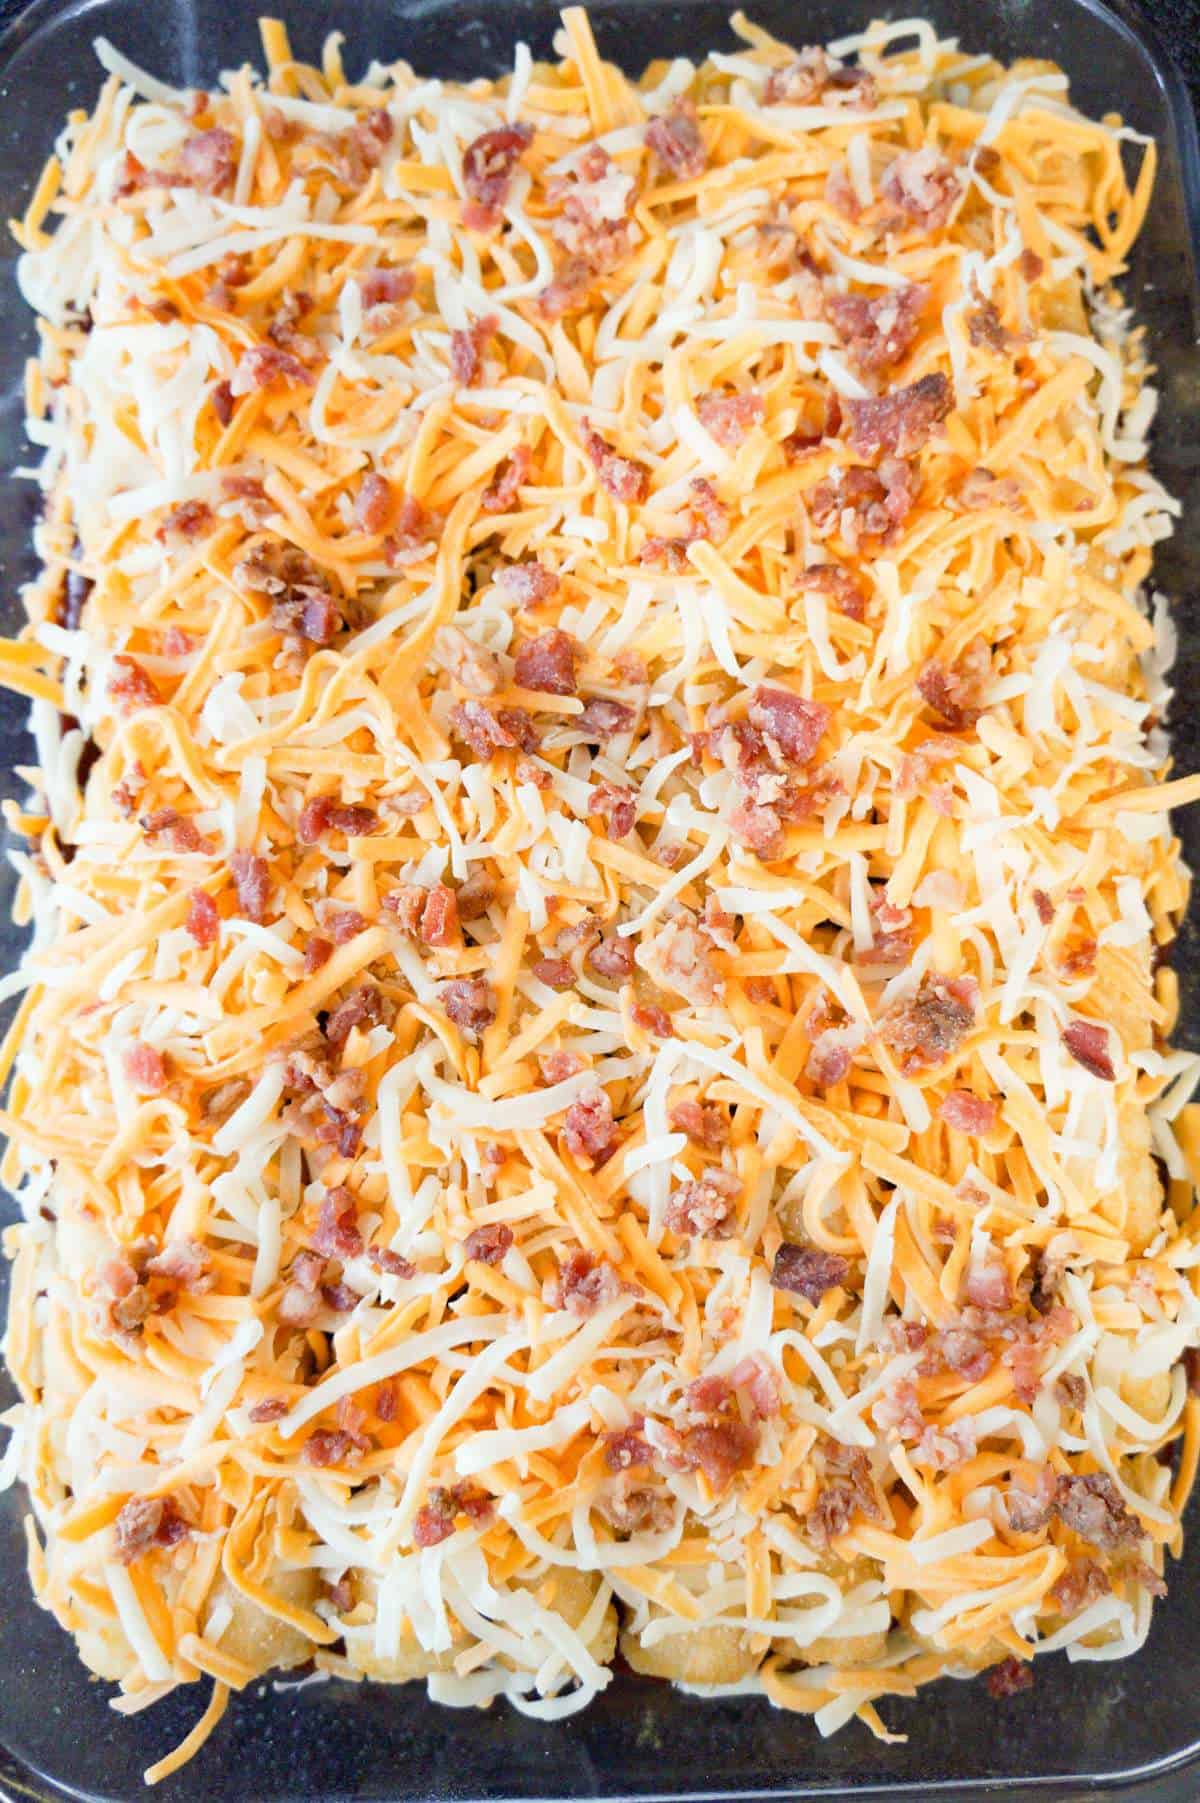 crumbled bacon and shredded cheese on top of meatloaf casserole before baking